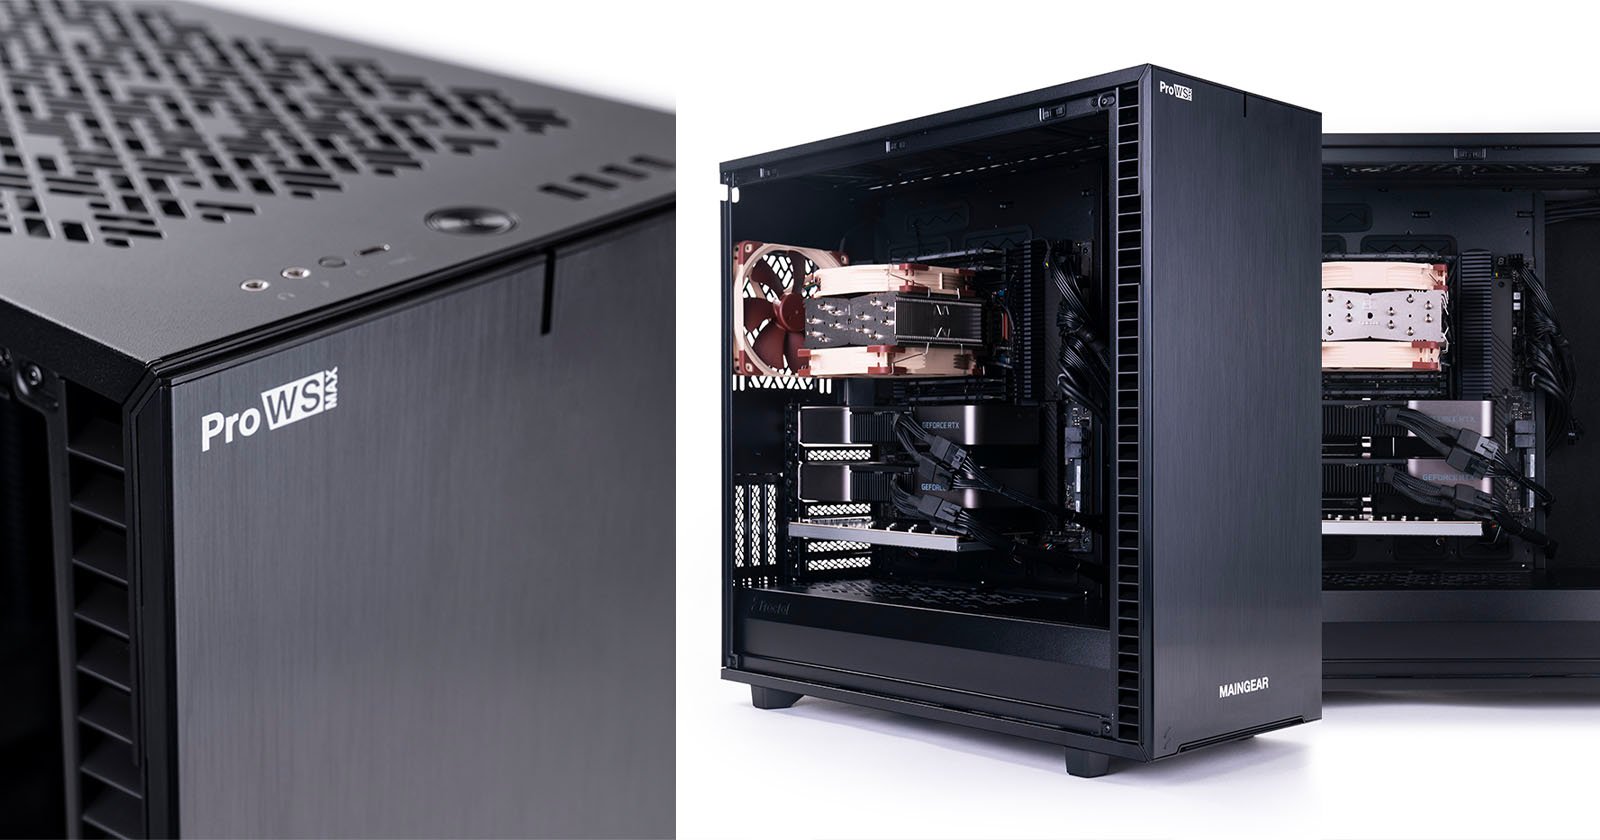 MainGear's New Line of Pre-Built PCs is Made for Photo and Video Editors